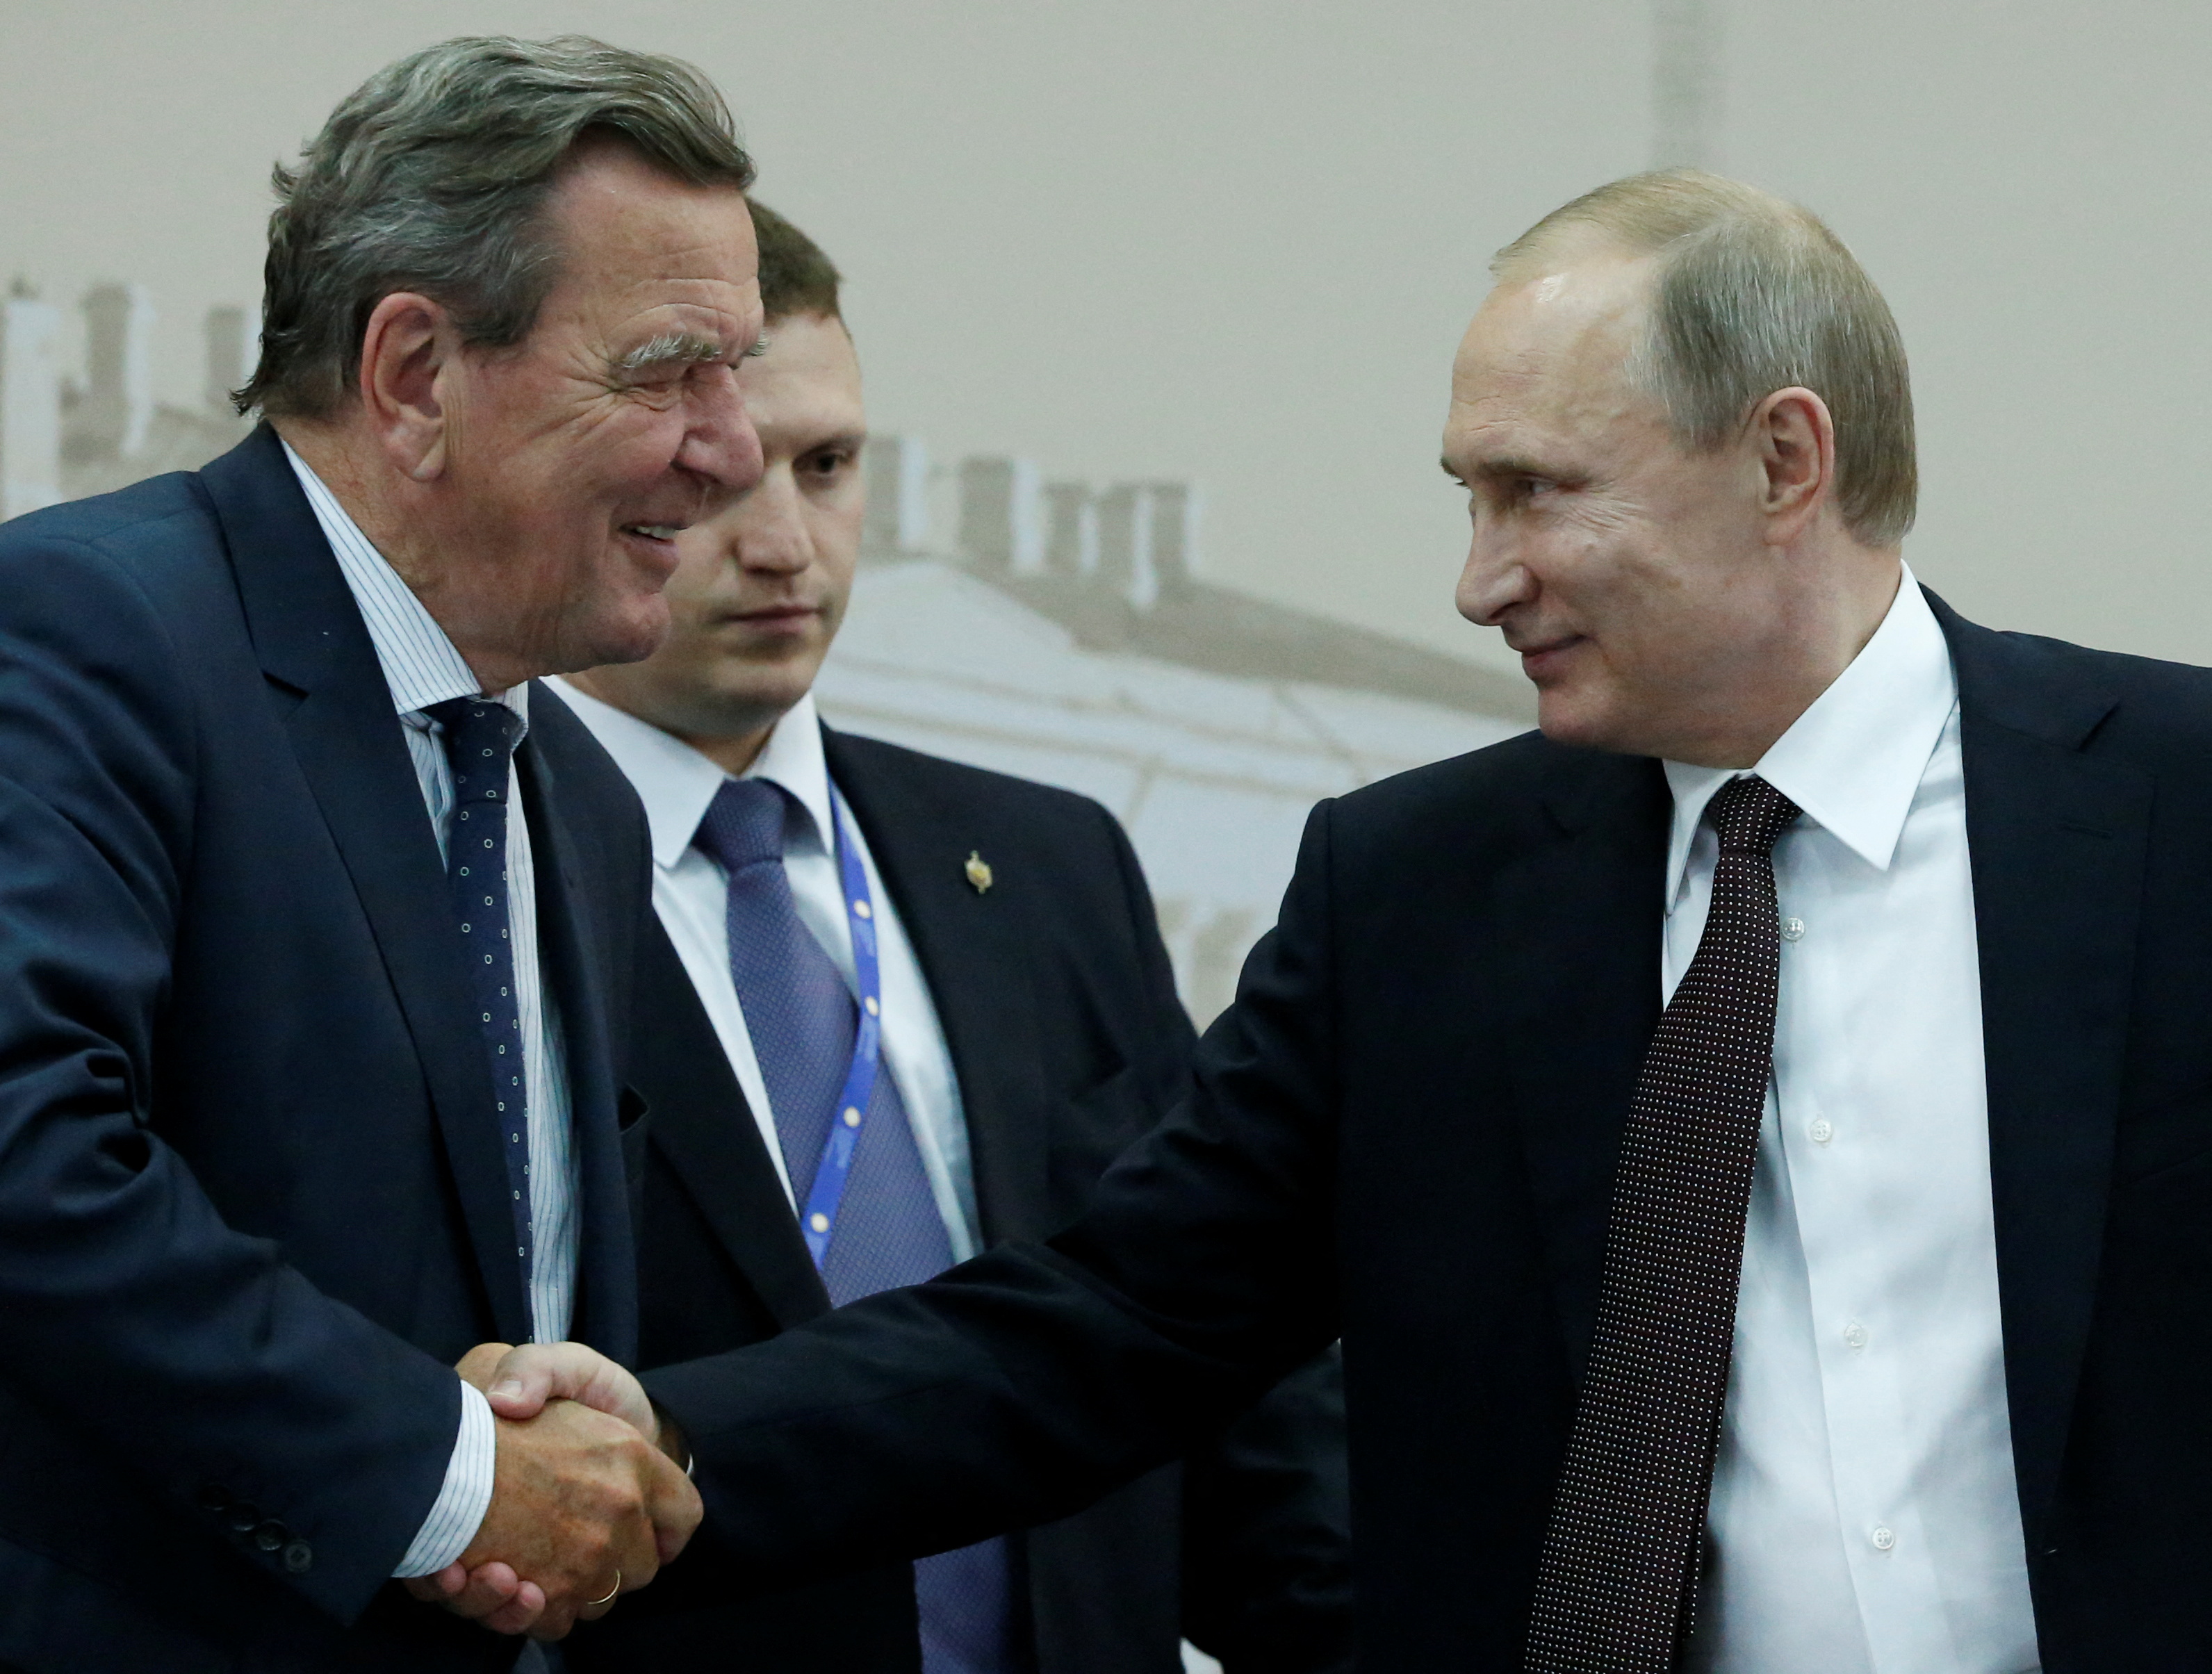 FILE PHOTO: Russian President Vladimir Putin shakes hands with former German Chancellor Gerhard Schroeder during a meeting with heads of foreign companies and business associations as part of the St. Petersburg International Economic Forum 2016 (SPIEF 2016) in St. Petersburg, Russia, June 17, 2016.  REUTERS/Grigory Dukor/File Photo